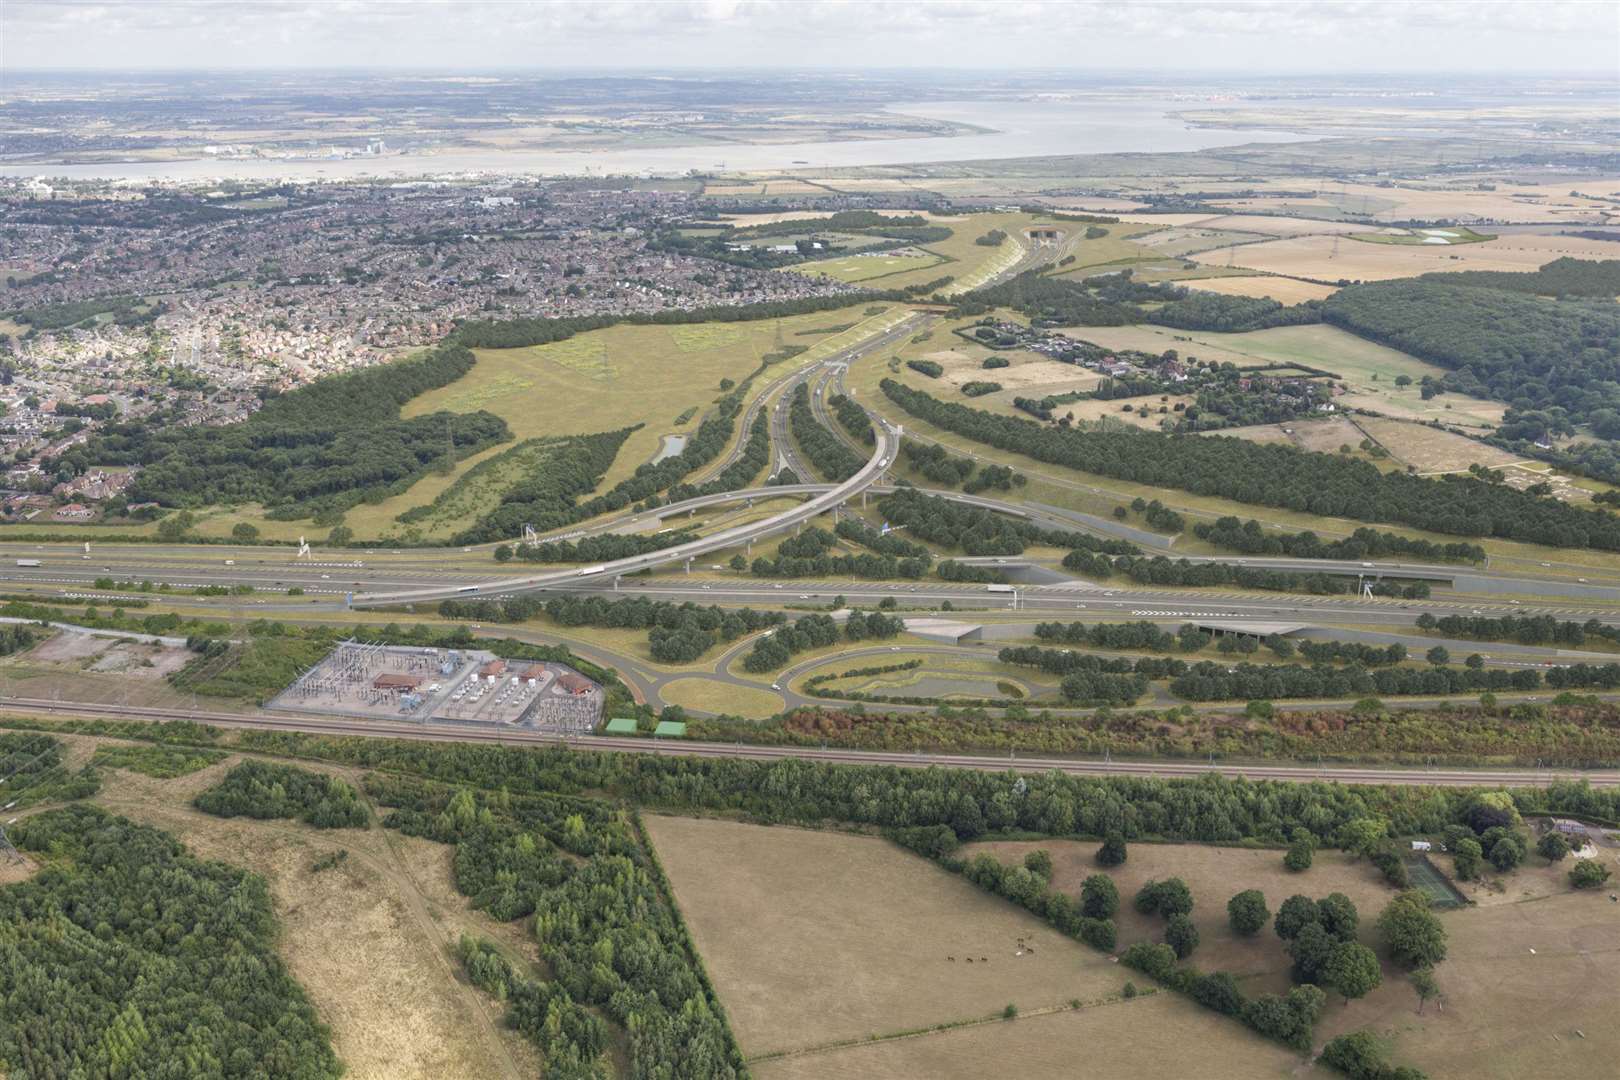 Highways chiefs aim the Lower Thames Crossing to be the 'greenest road ever built in the UK'. Picture: National Highways